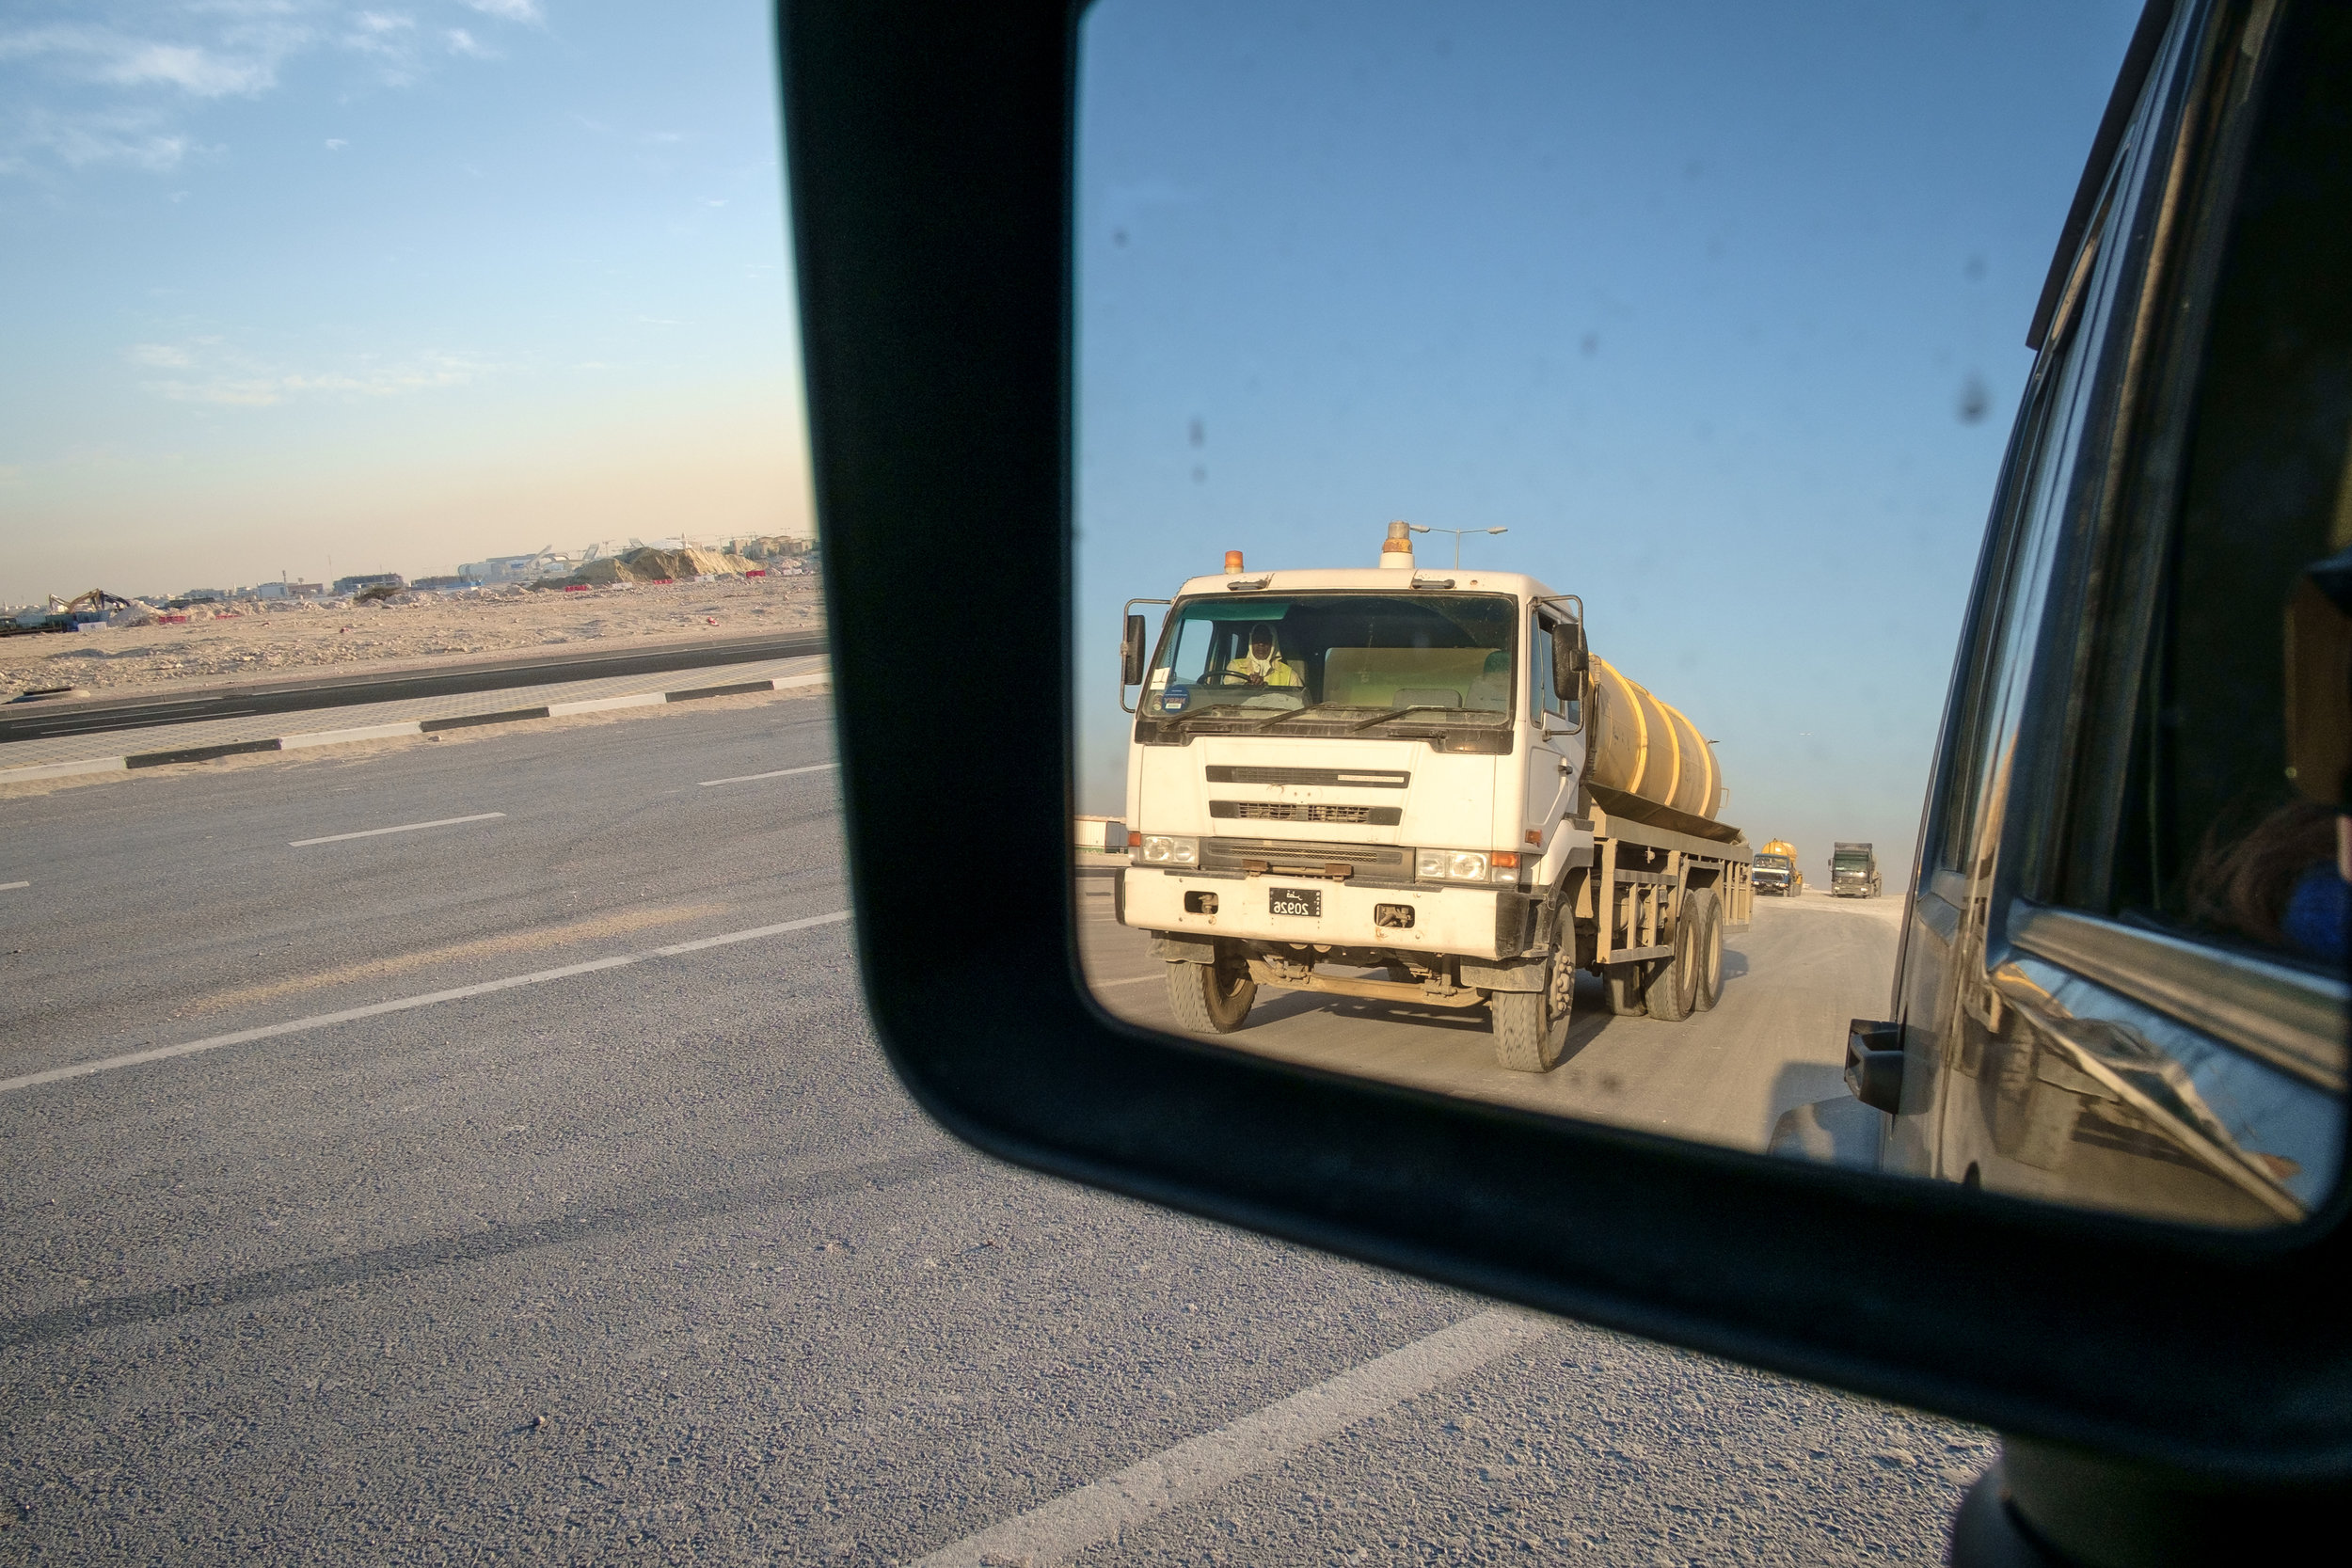  The ubiquitous semi truck is seen at the end of the day leaving a massive construction site on the outskirts of Doha. 